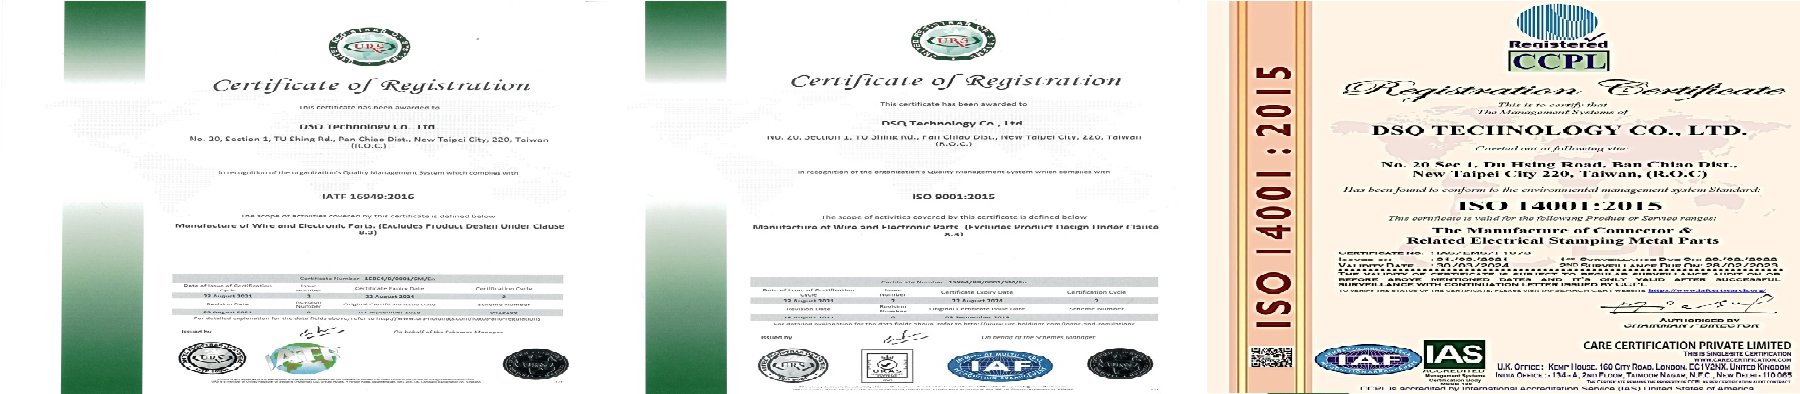 IATF16949:2016, ISO9001, ISO14001 certification renewal completed.